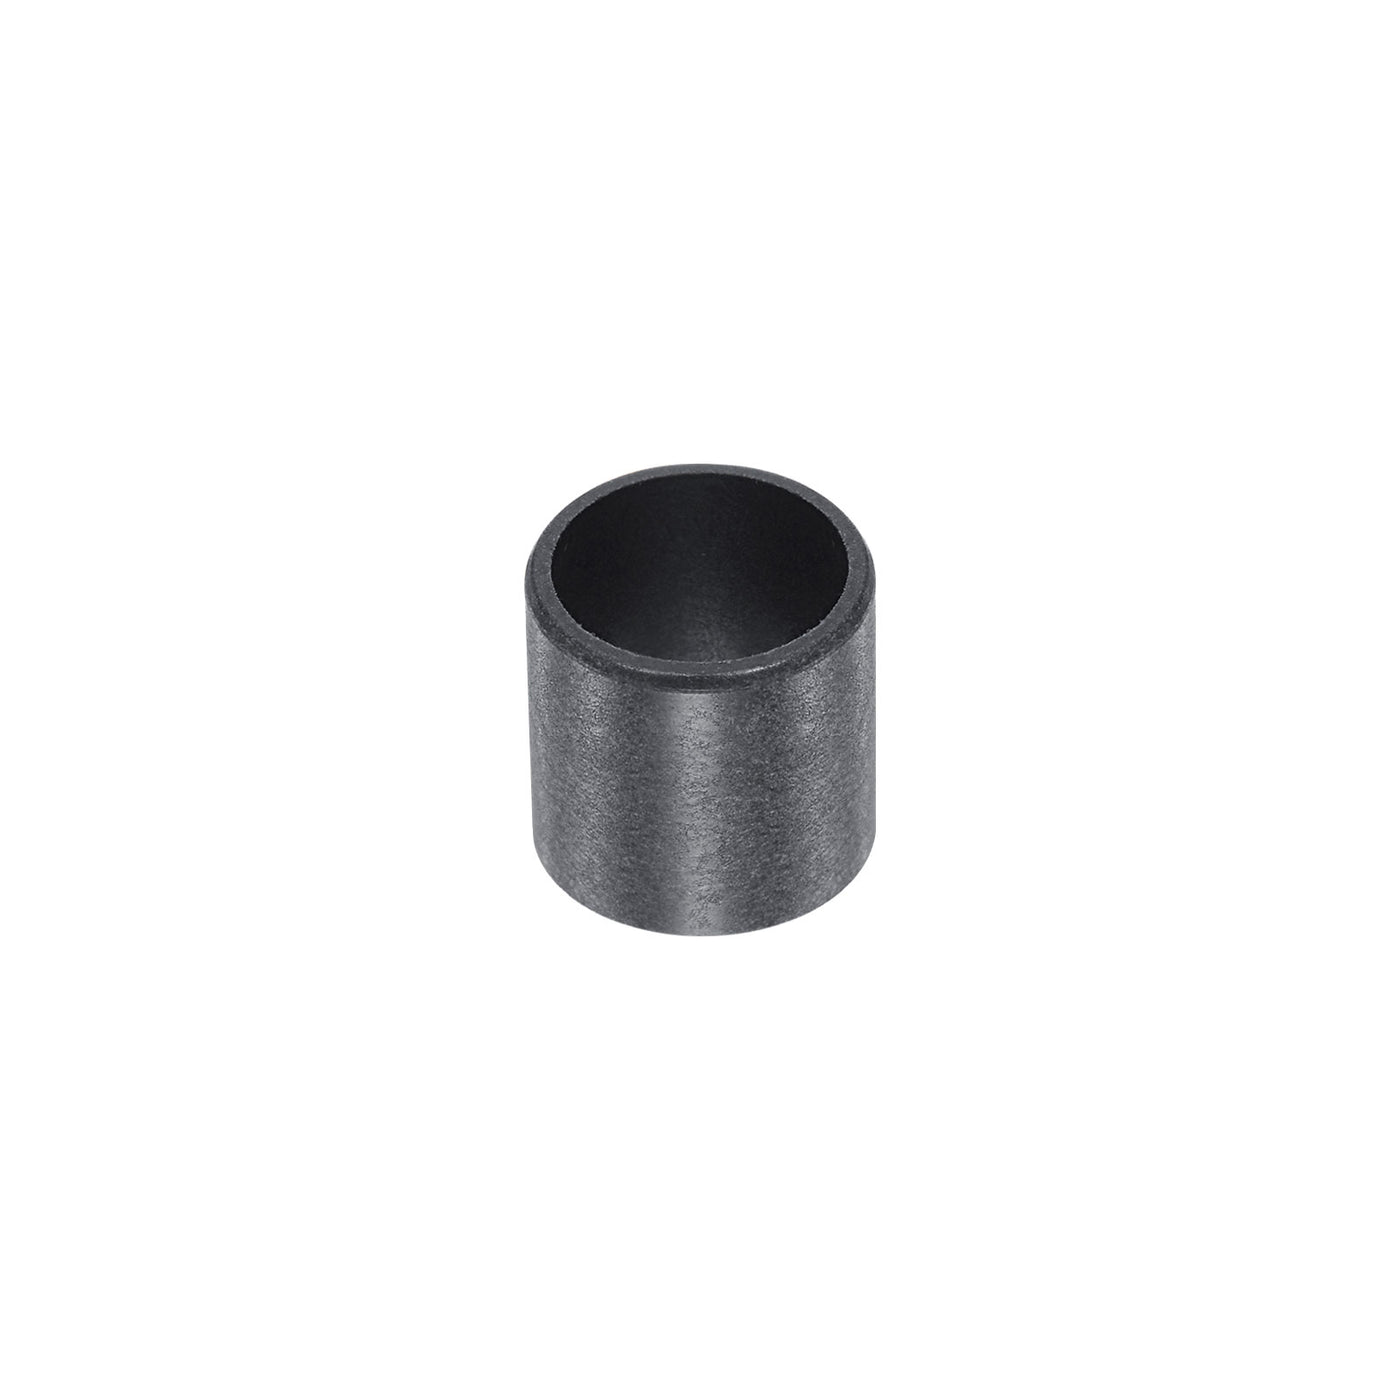 uxcell Uxcell Sleeve Bearings 10mmx12mmx10mm POM Wrapped Oilless Bushings Black